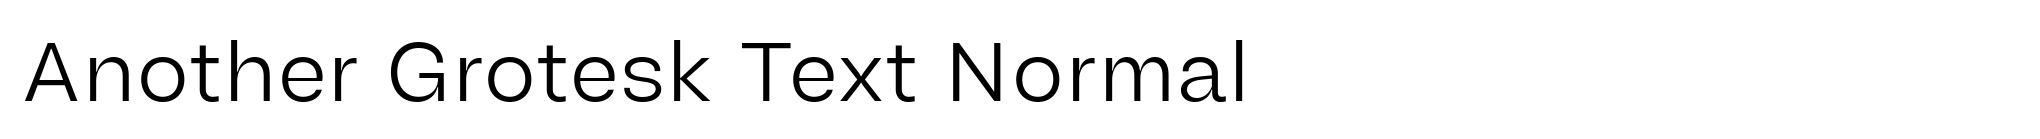 Another Grotesk Text Normal image